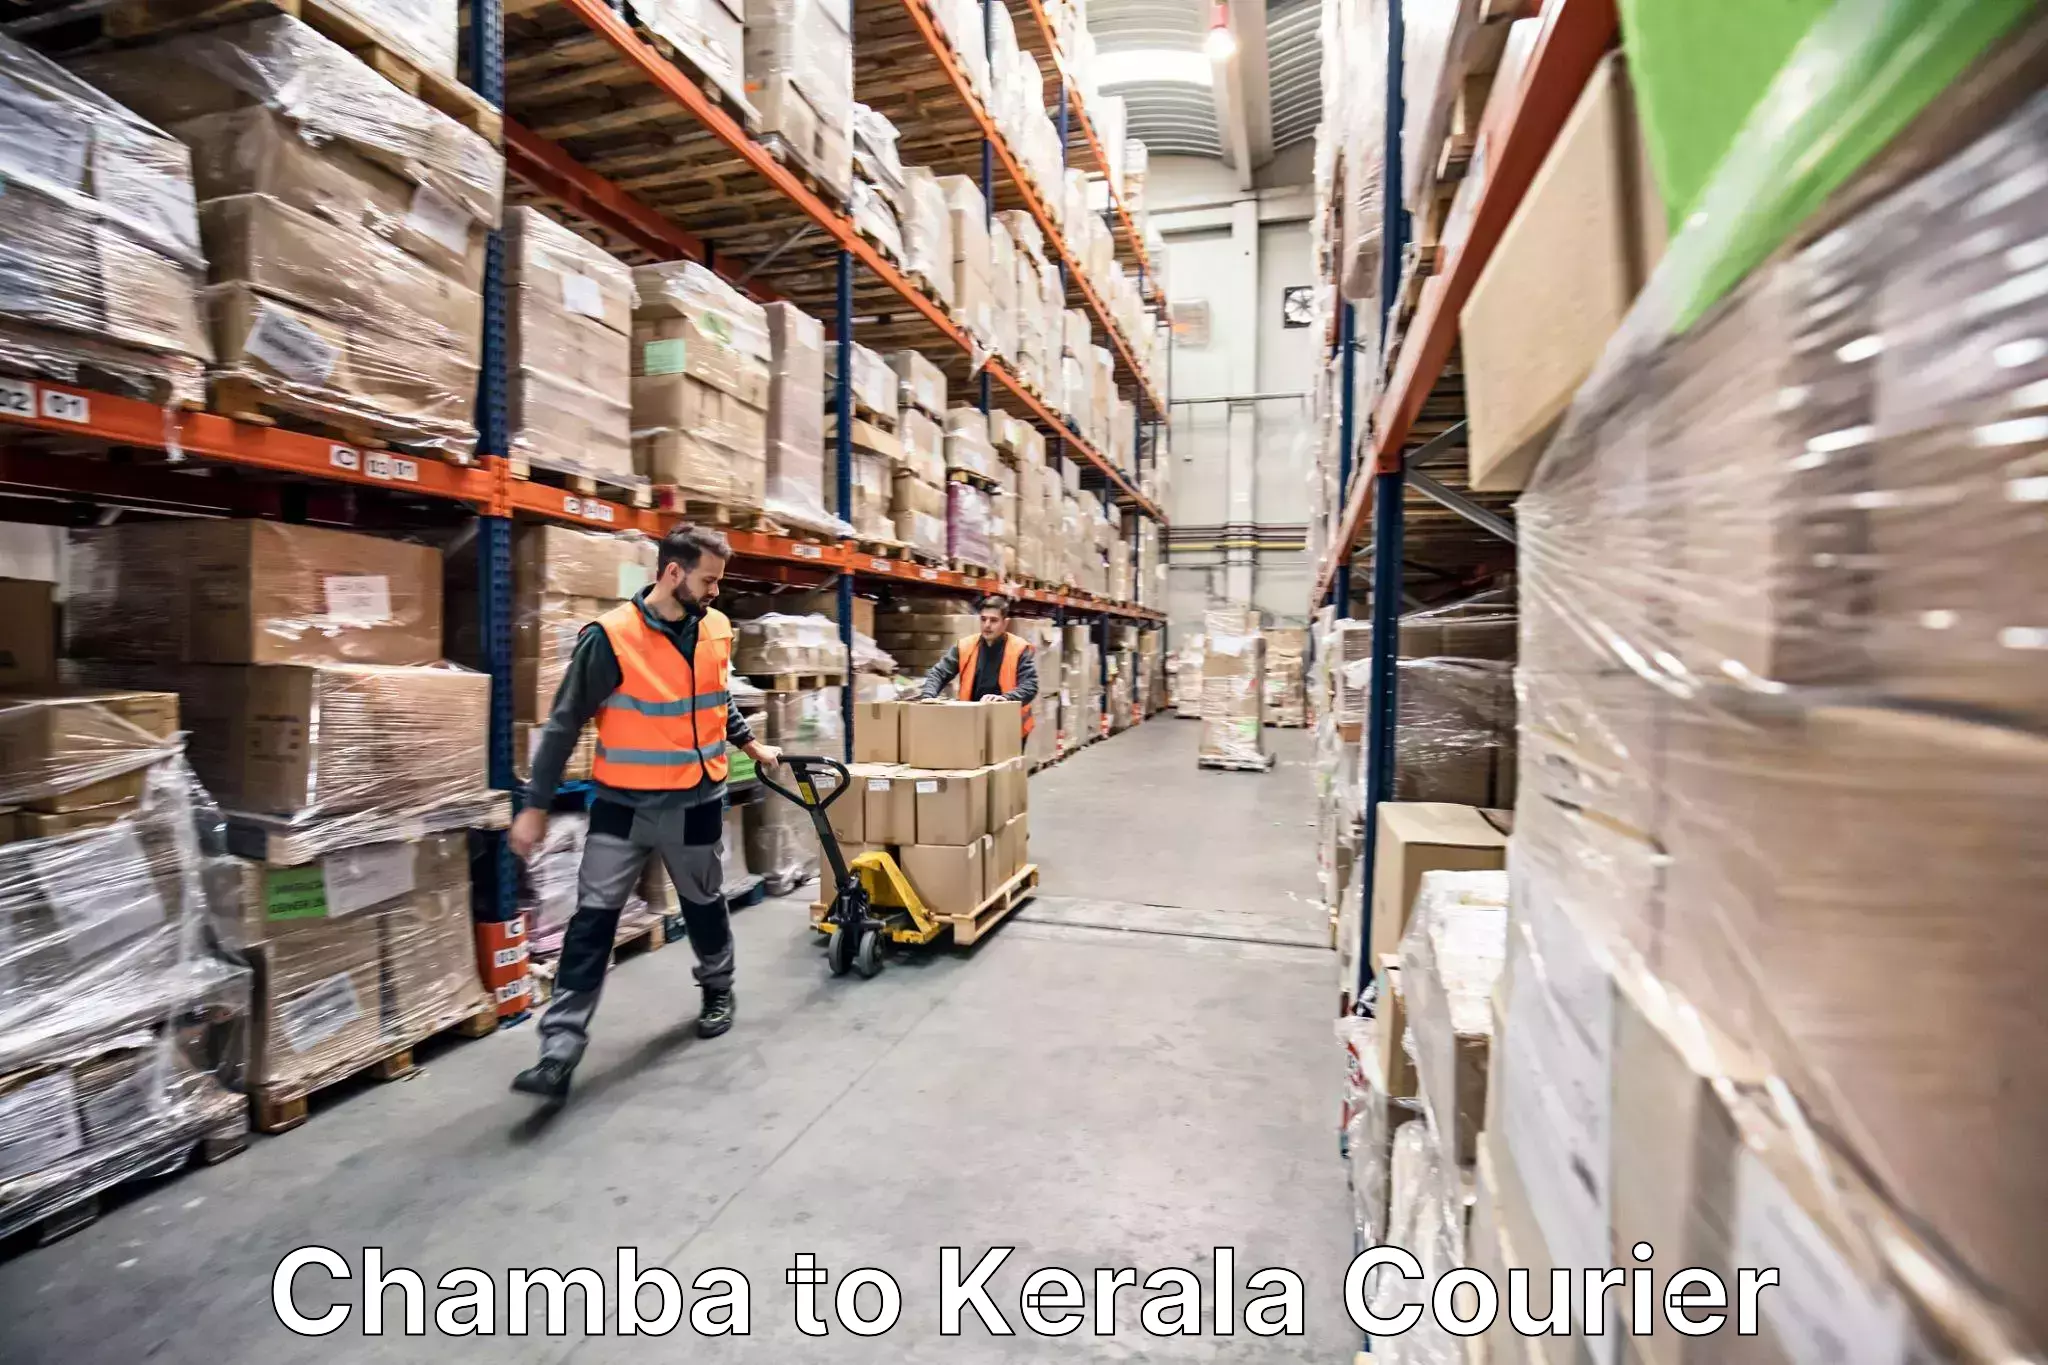 Furniture delivery service Chamba to Kerala